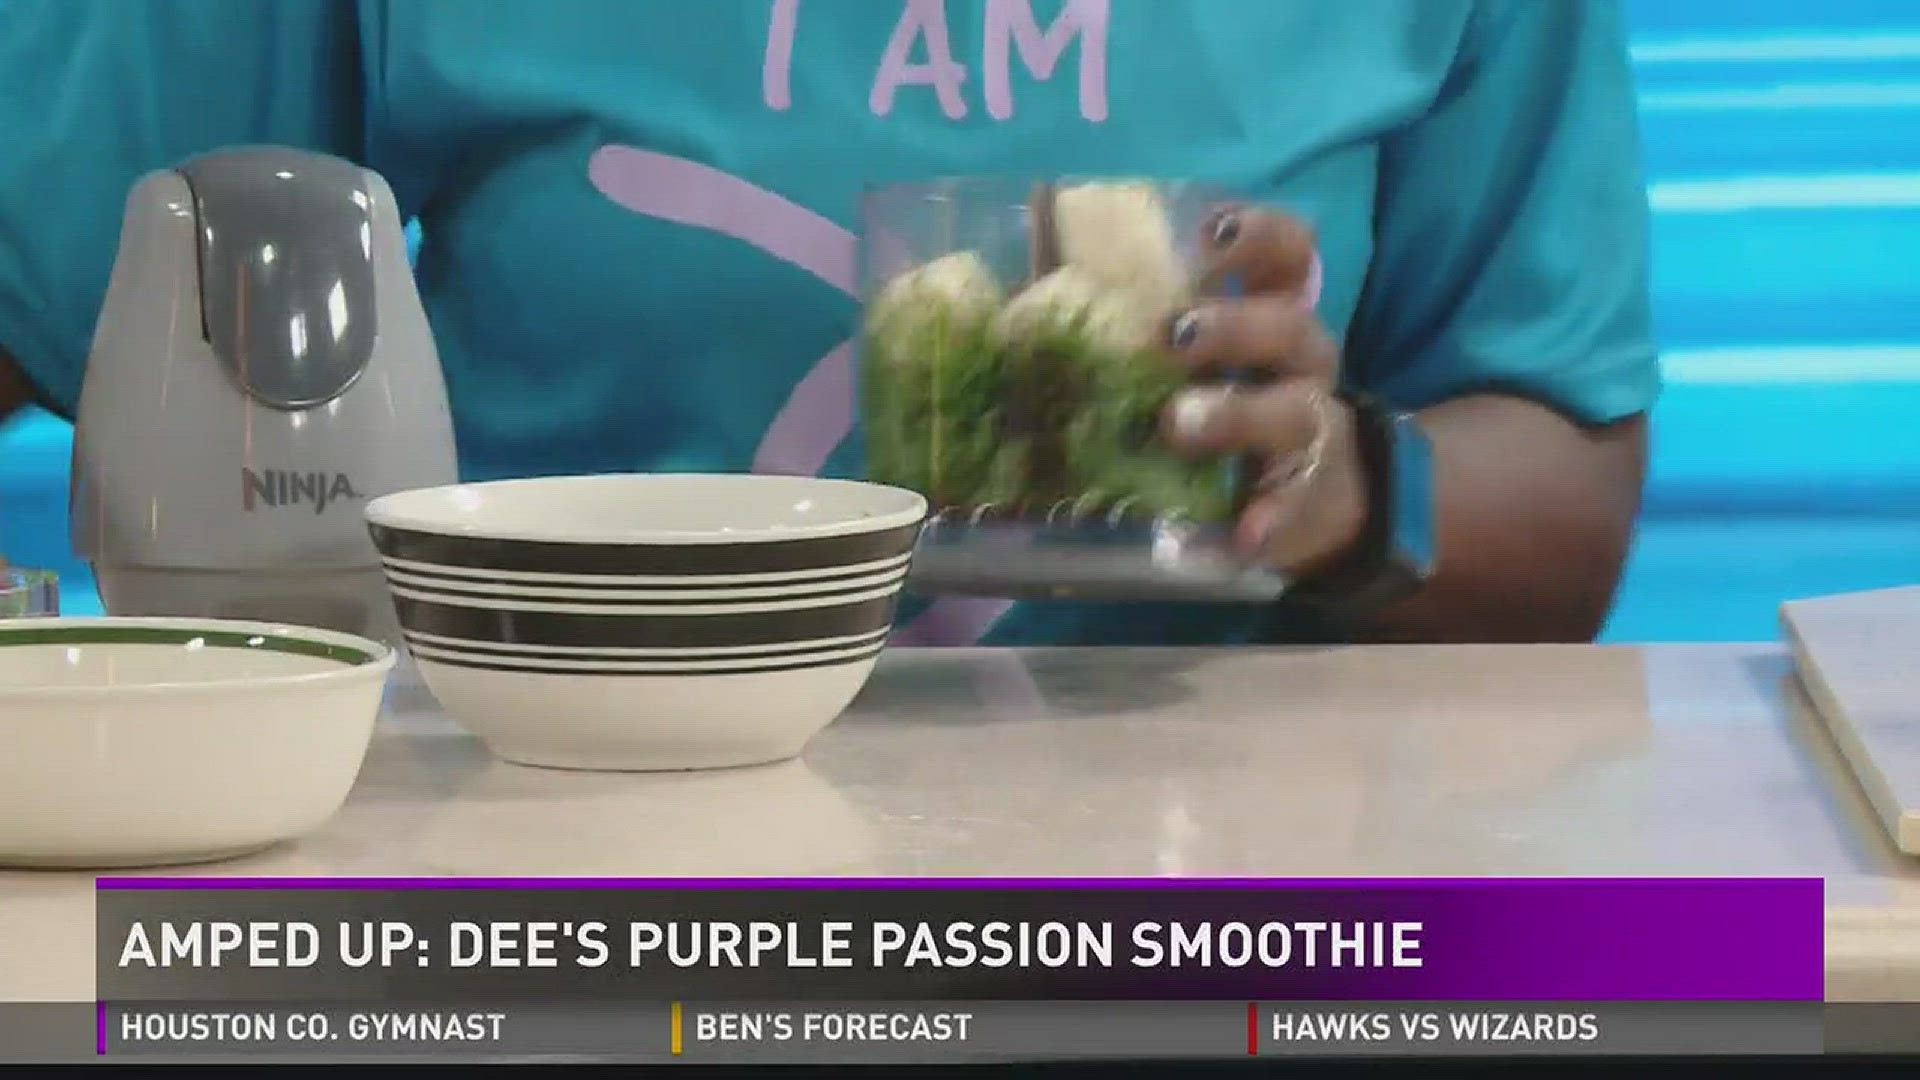 Amped Up: Dee's Purple Passion Smoothie